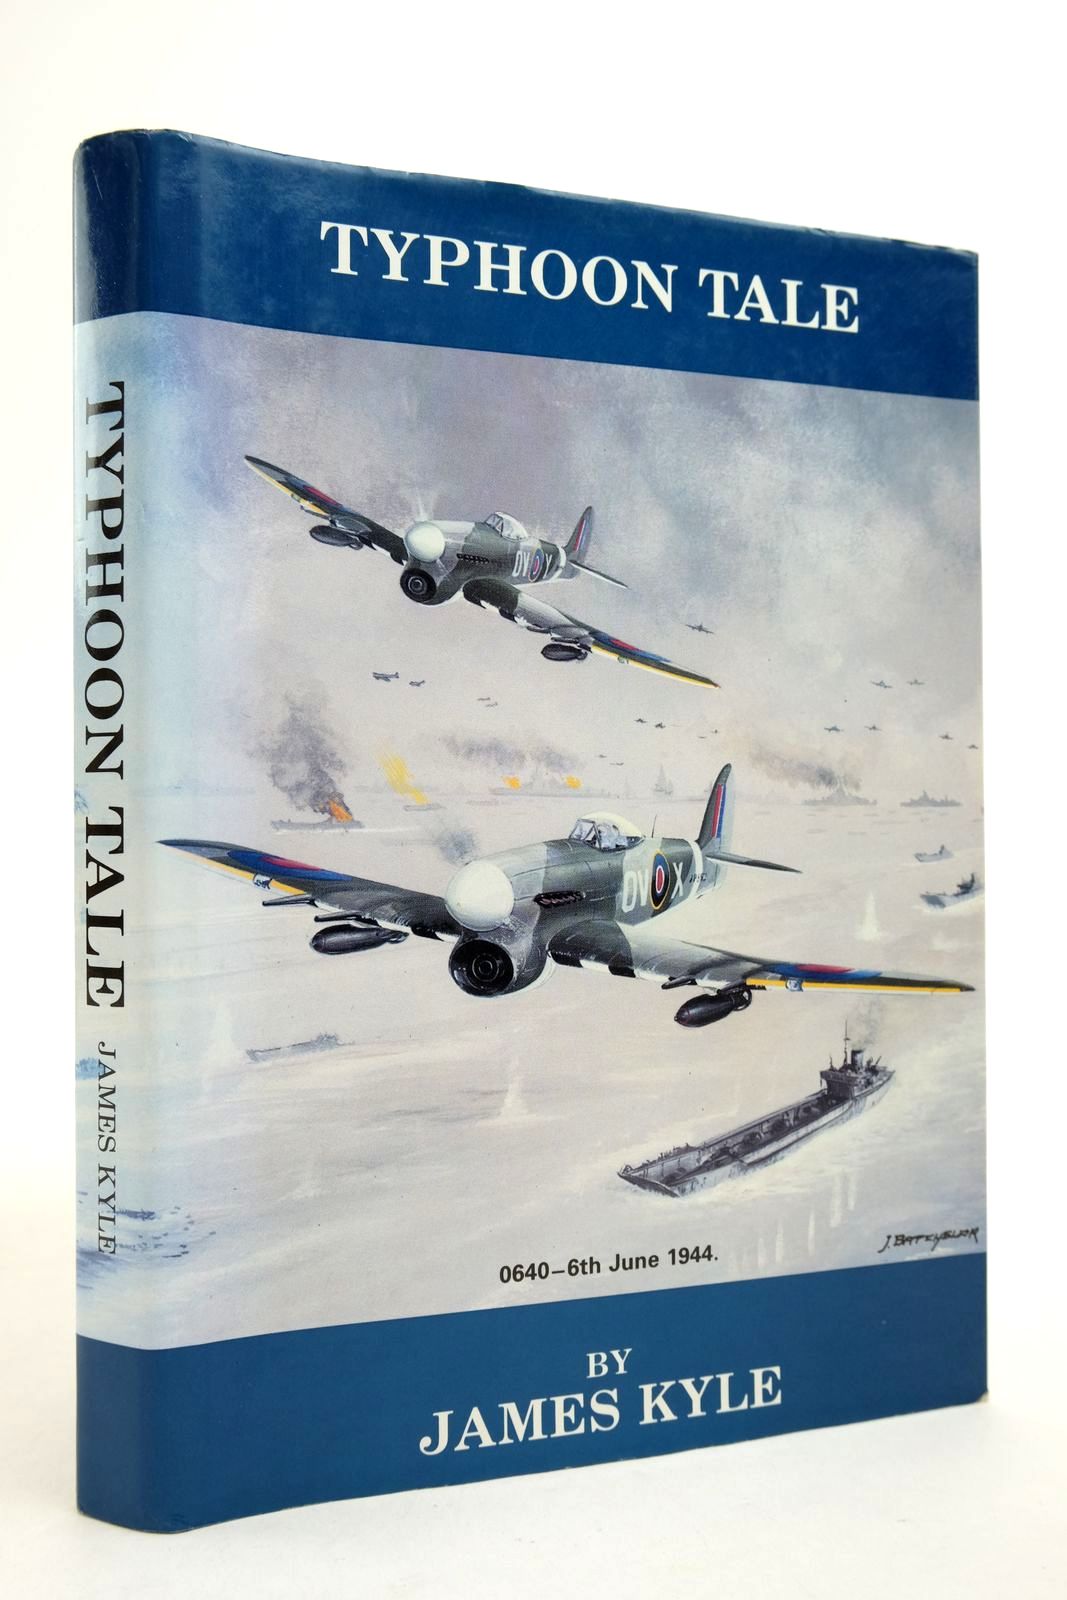 Photo of TYPHOON TALE written by Kyle, James published by Biggar & Co. (publishers) Ltd. (STOCK CODE: 2140664)  for sale by Stella & Rose's Books